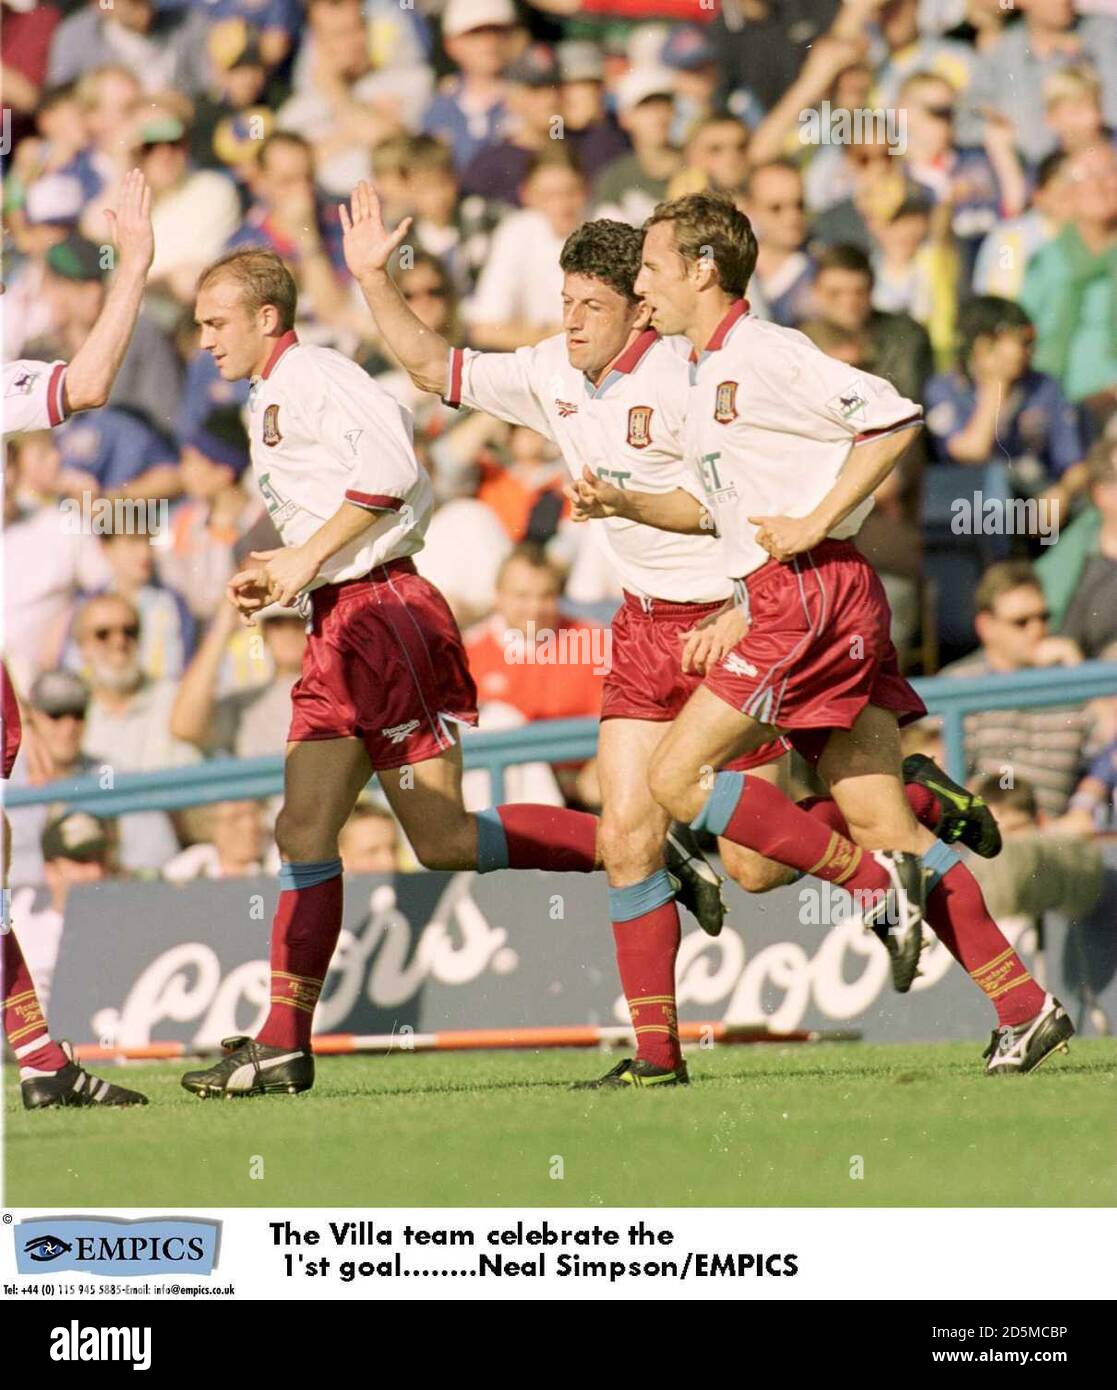 The Villa team Andy Townsend celebrate the 1'st goal. Neal Simpson/EMPICS Stock Photo